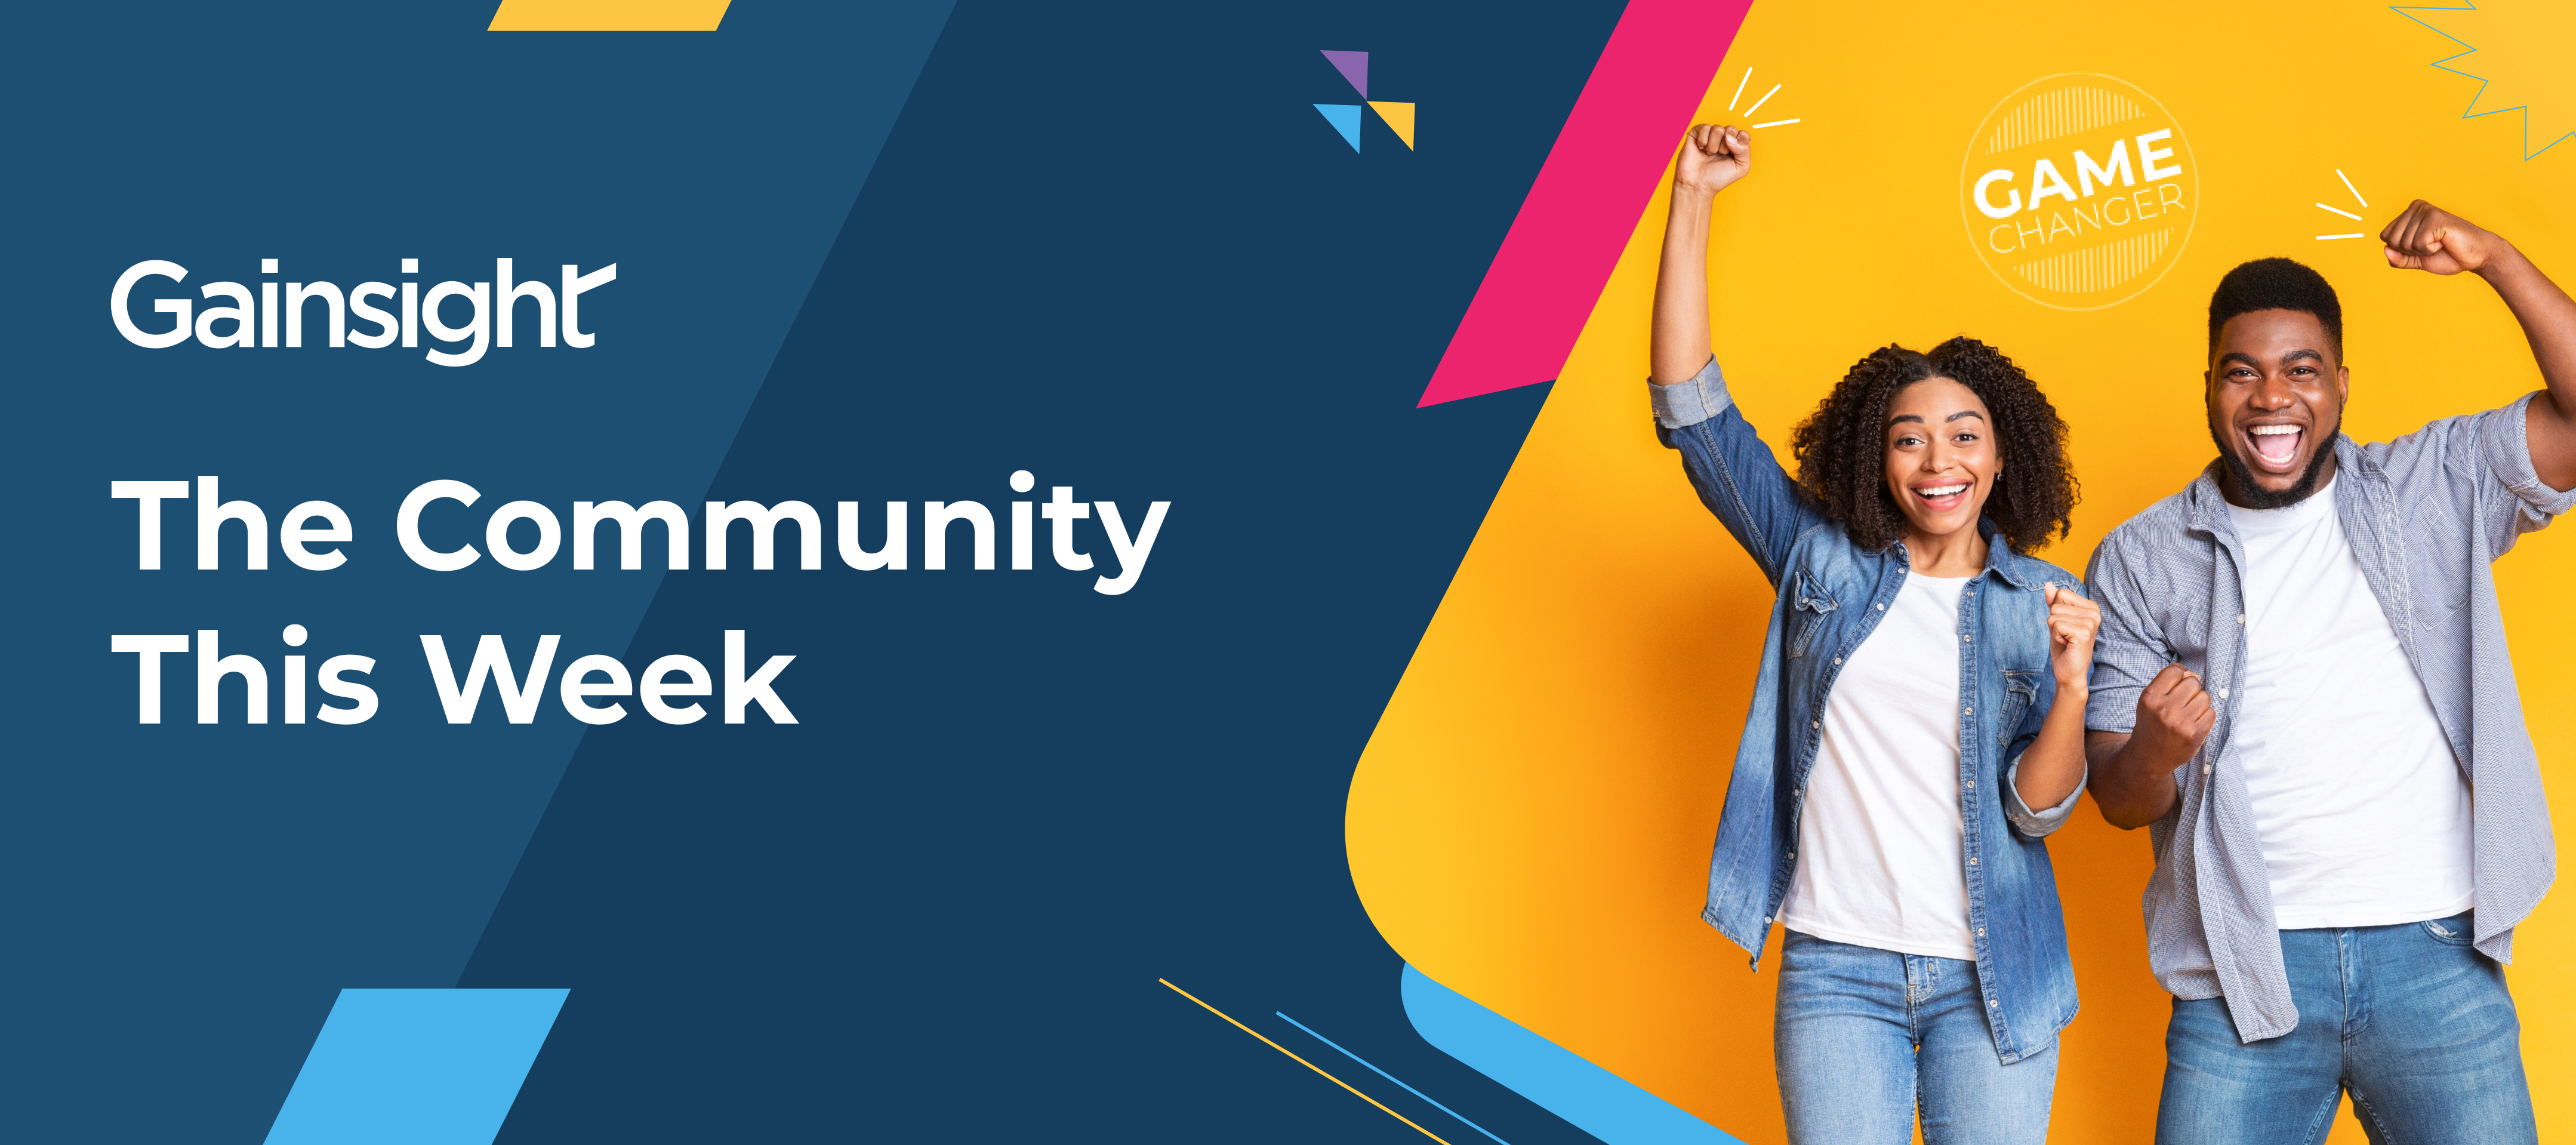 The Community This Week: Product Updates on GameChanger